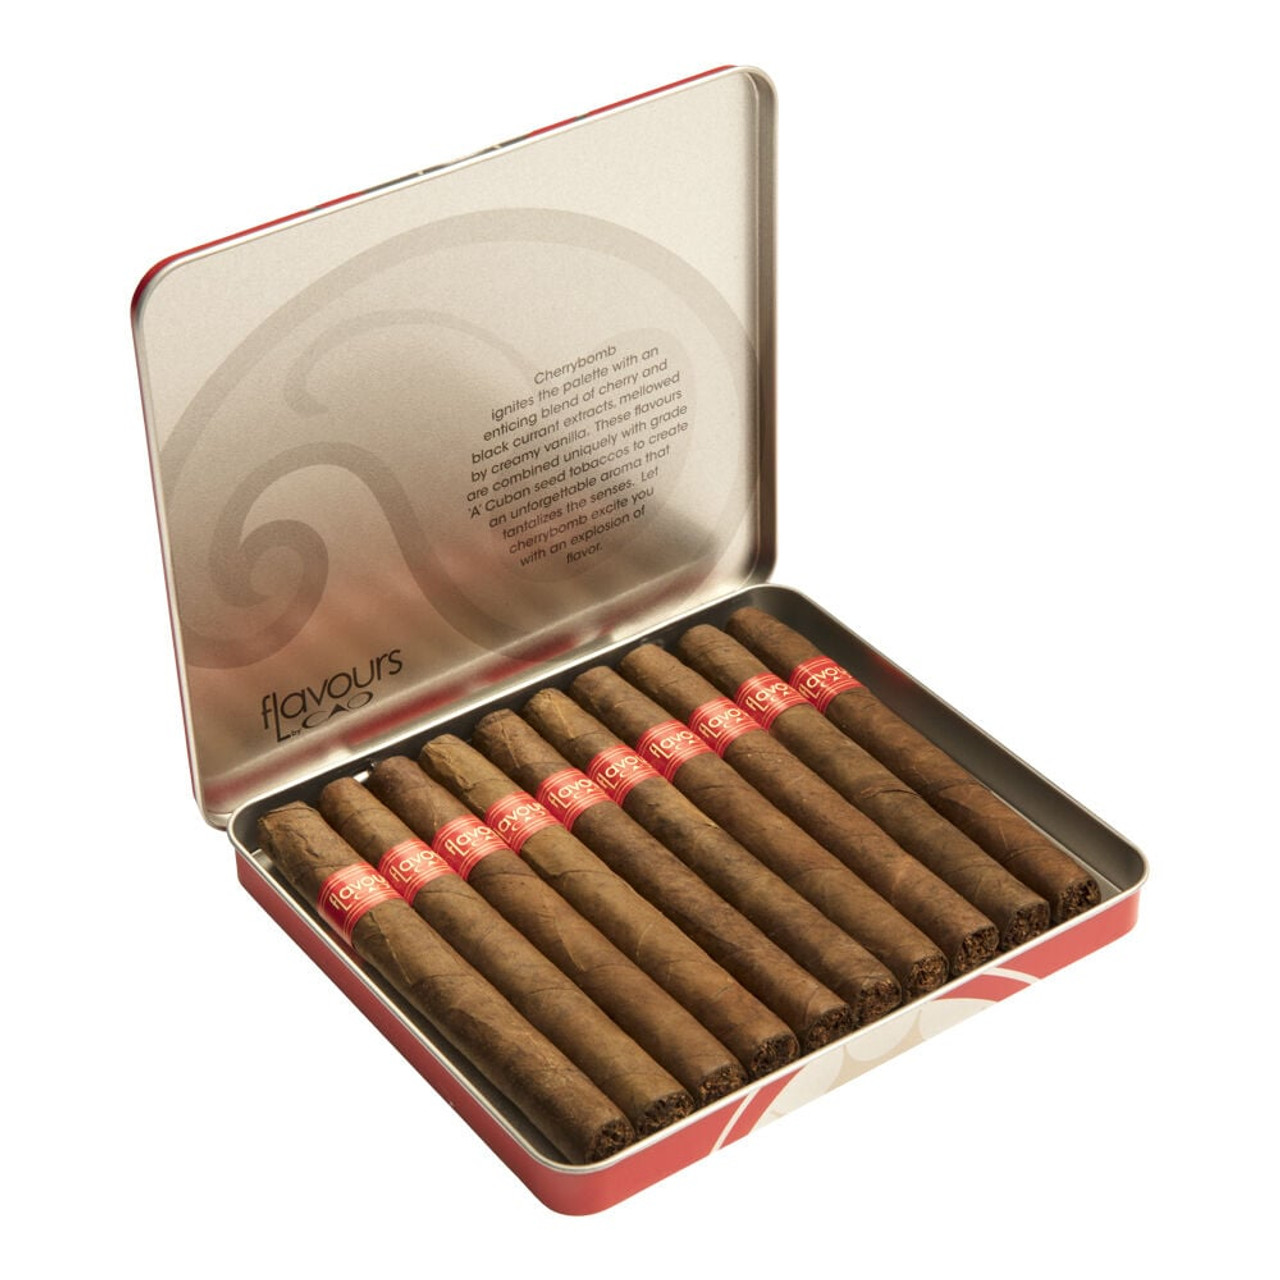 CAO Cherrybomb Cigarillo Cigars - 4 x 30 (5 Tins of 10 (50 total)) Open